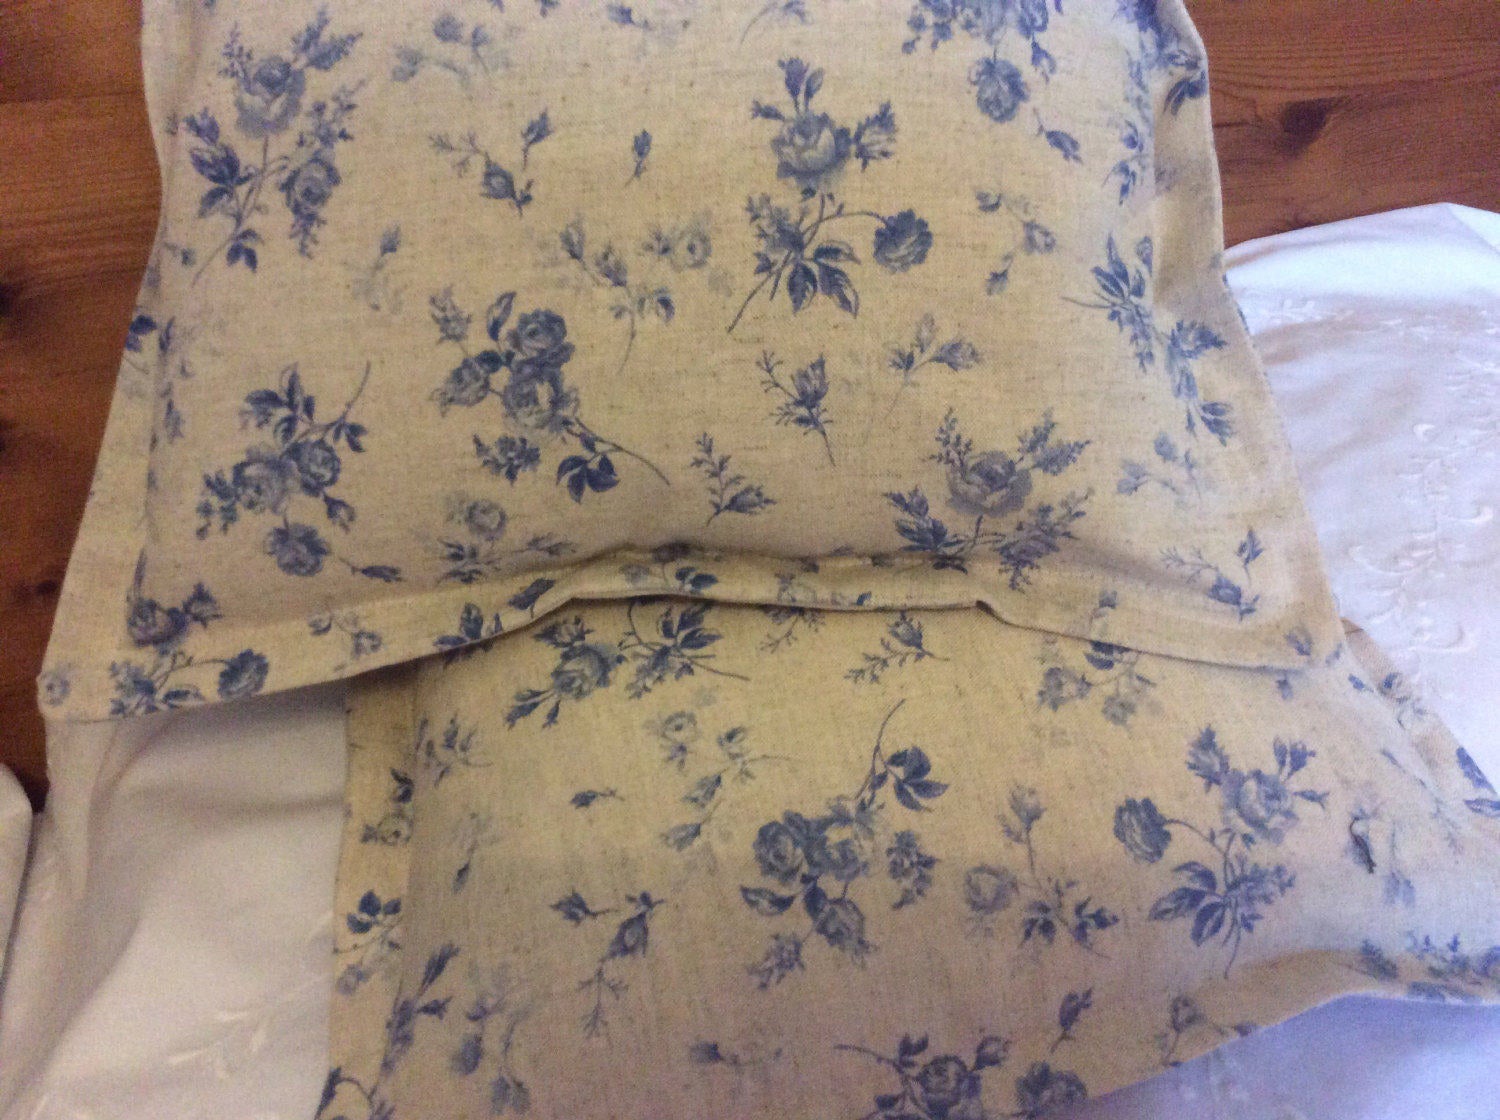 Cushion - linen and blue flowers